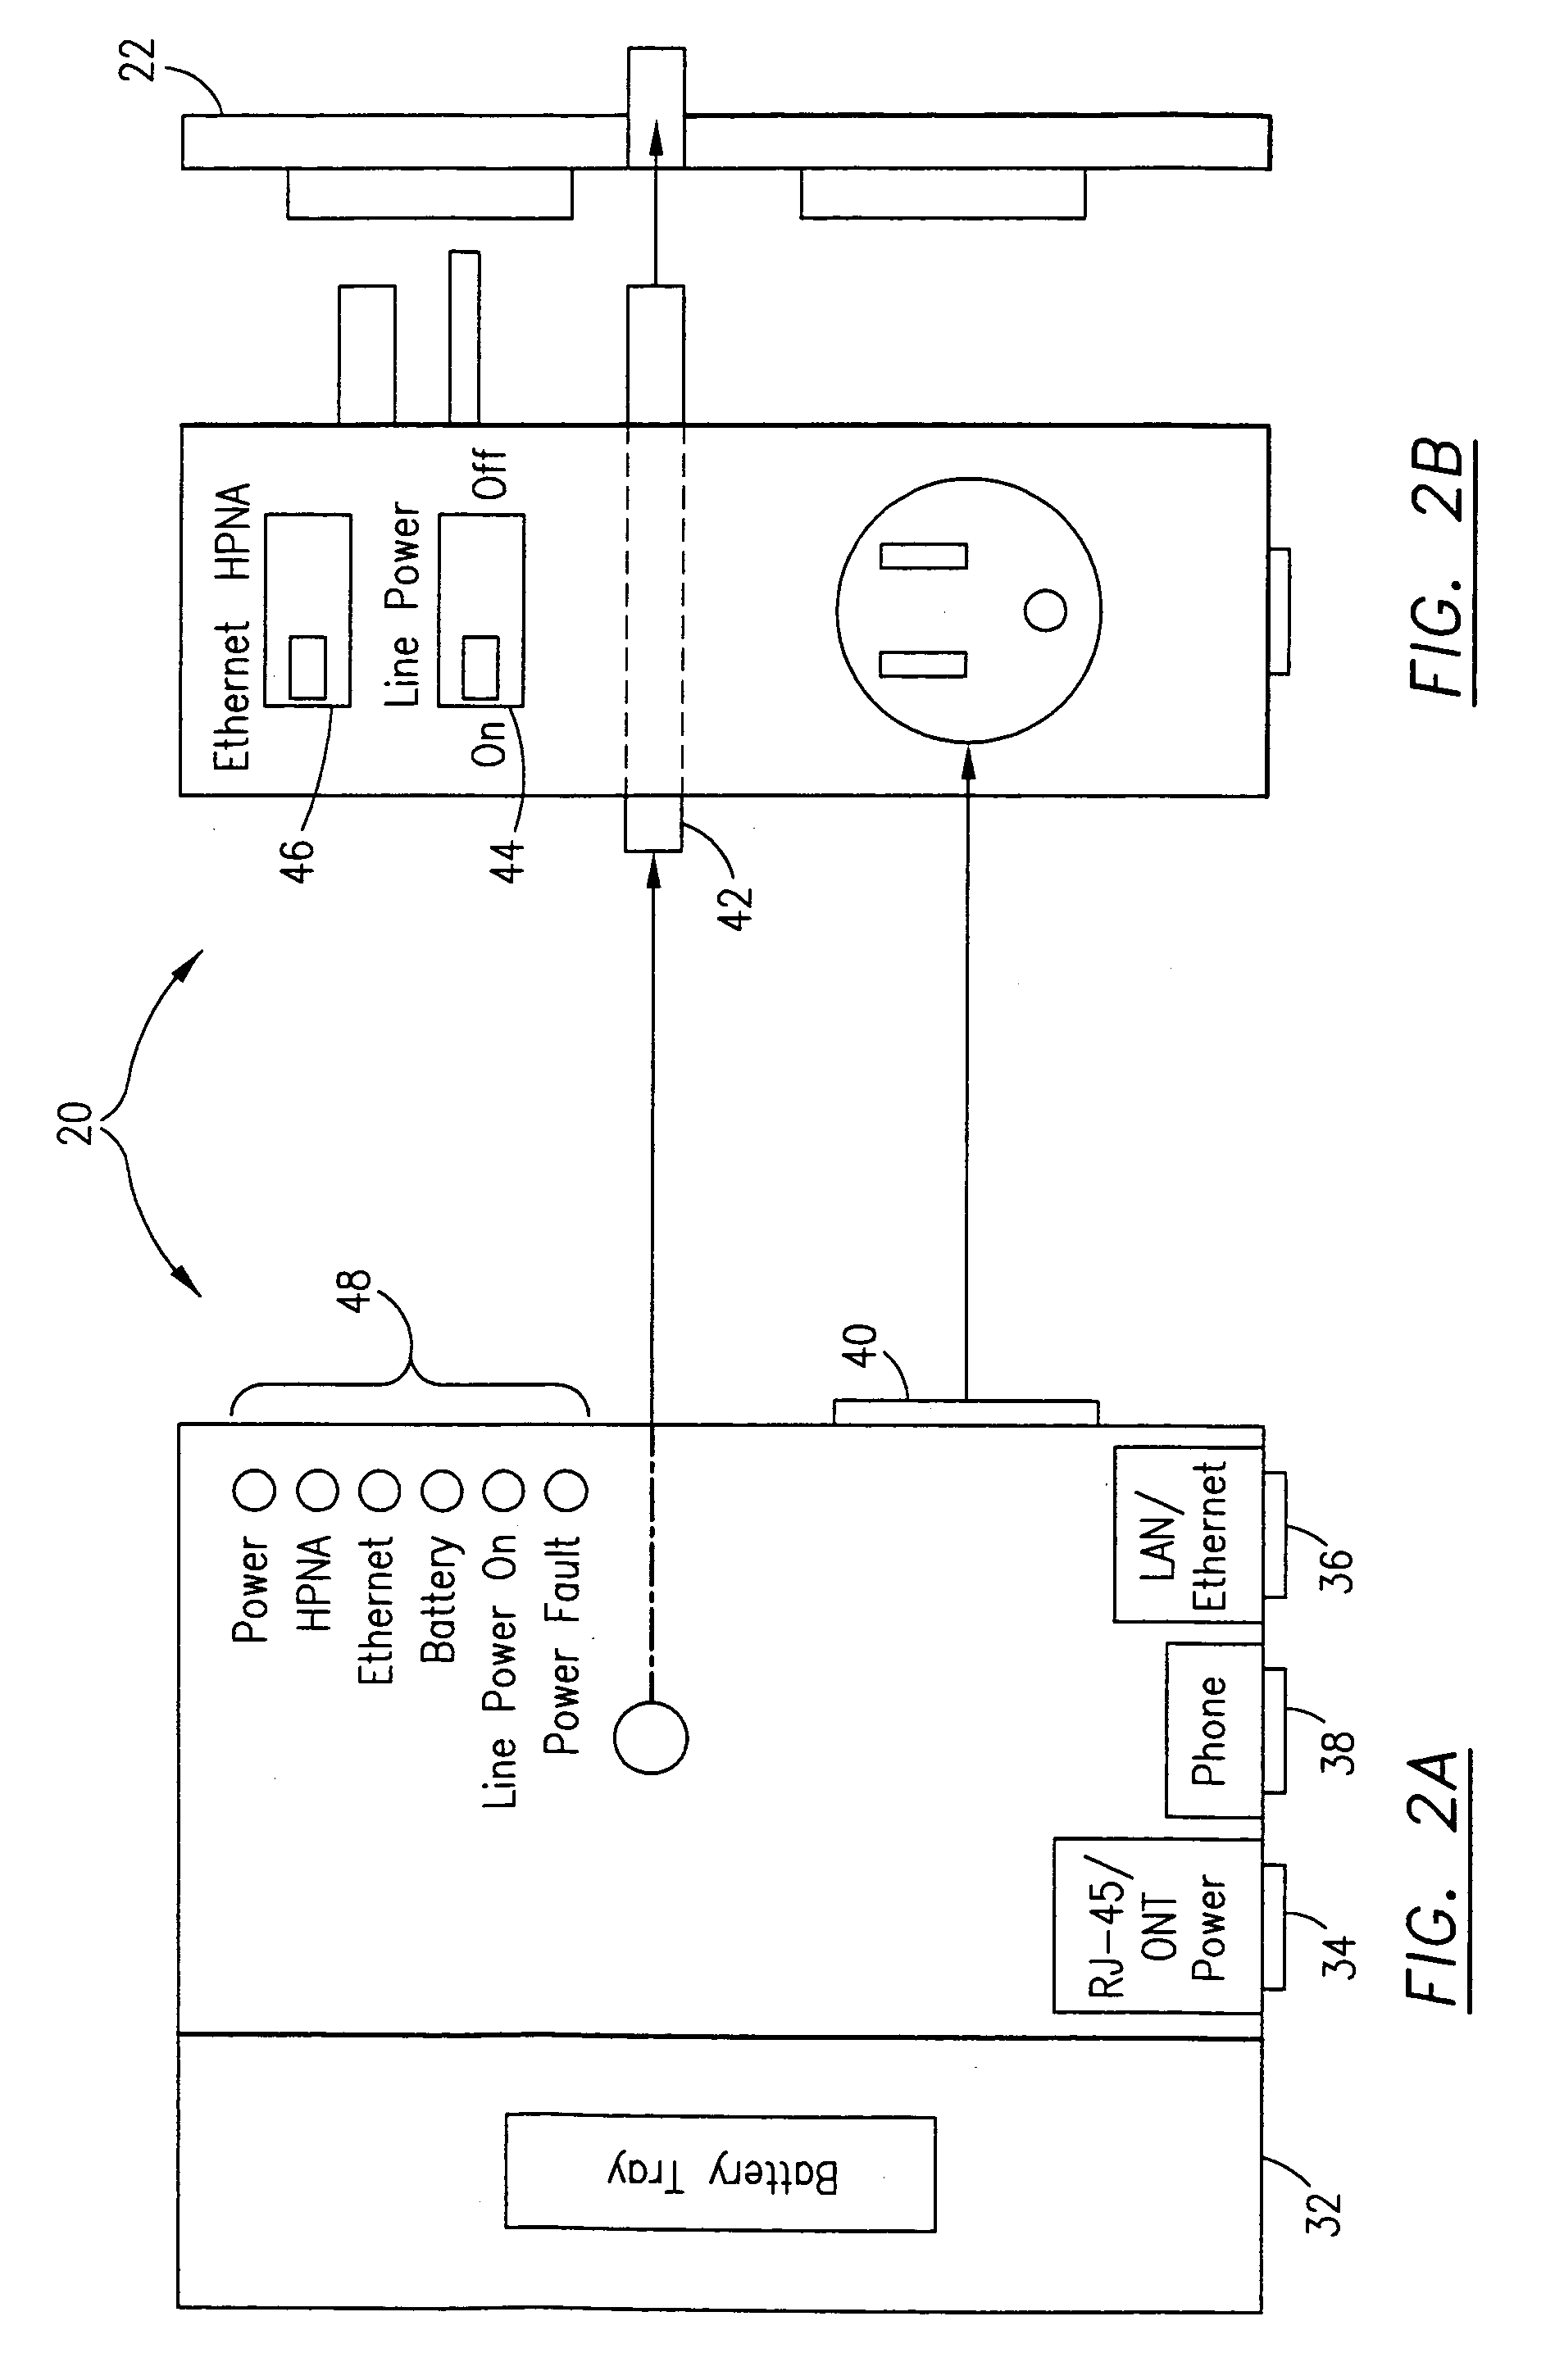 Power adapter and broadband line extender system and method